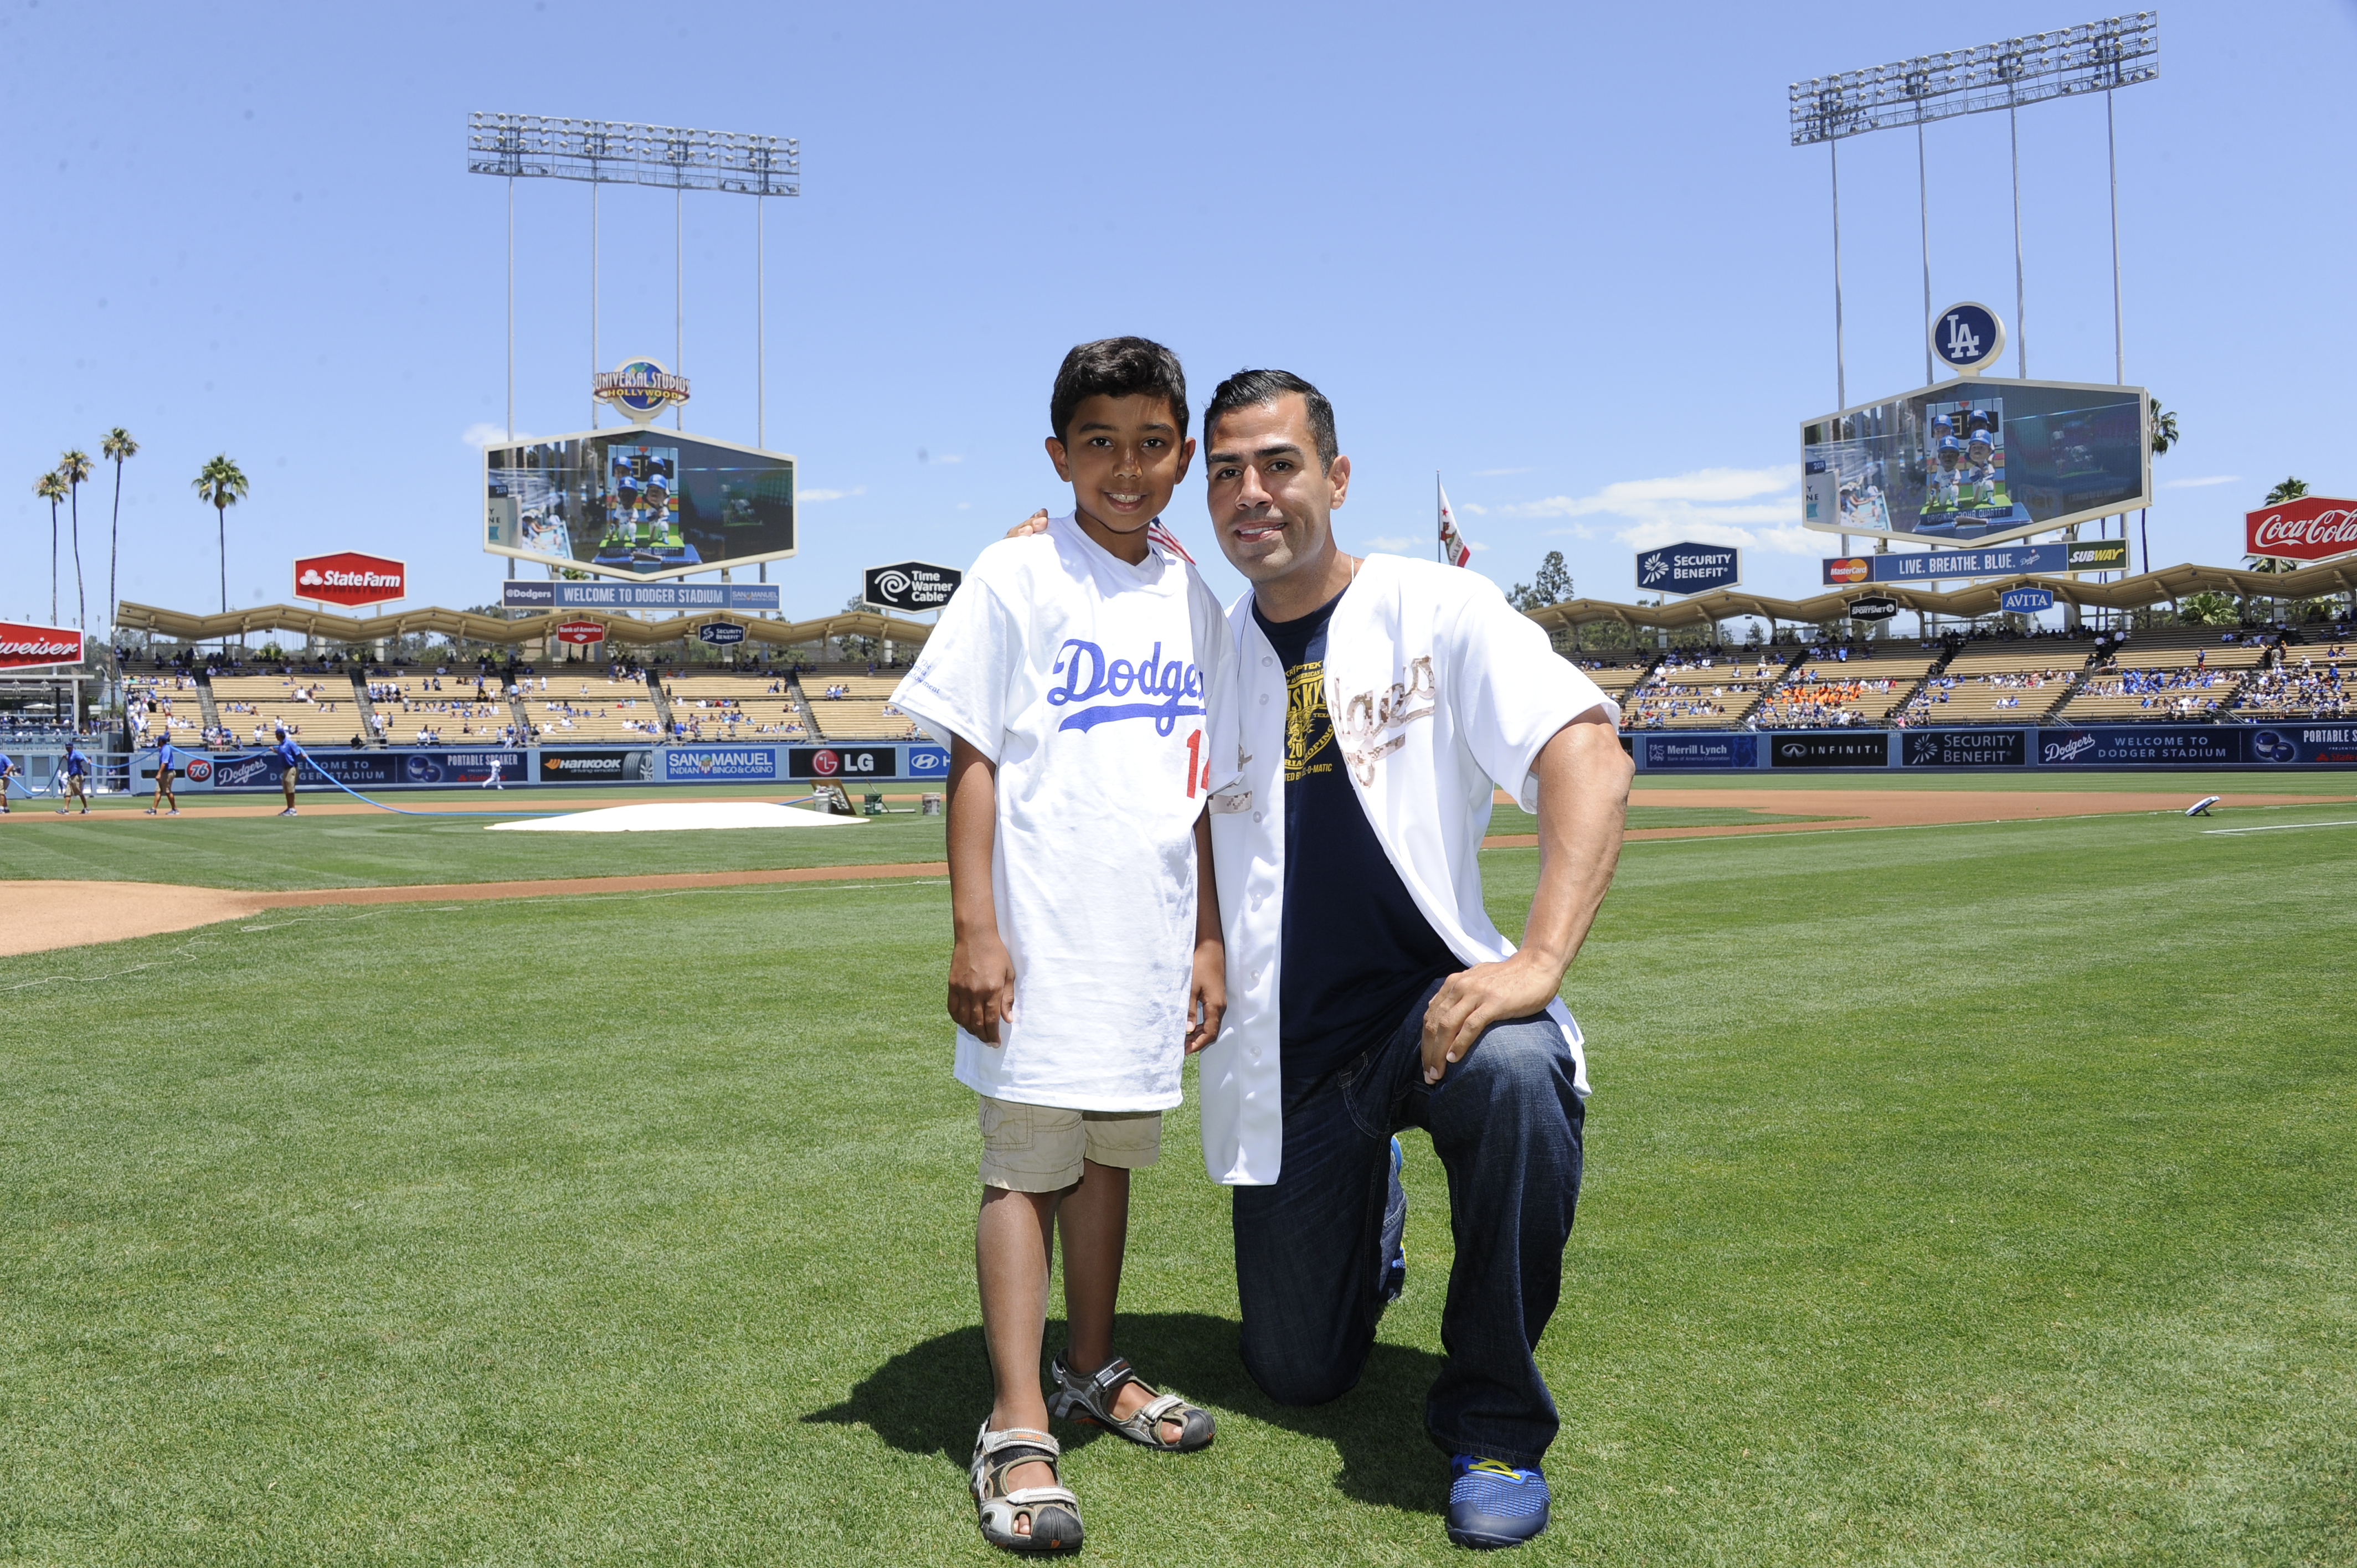 JW Cortes and his son moments before JW sang the National Anthem for the LA Dodgers vs. San Diego Padres game in front of nearly 48,000 fans!